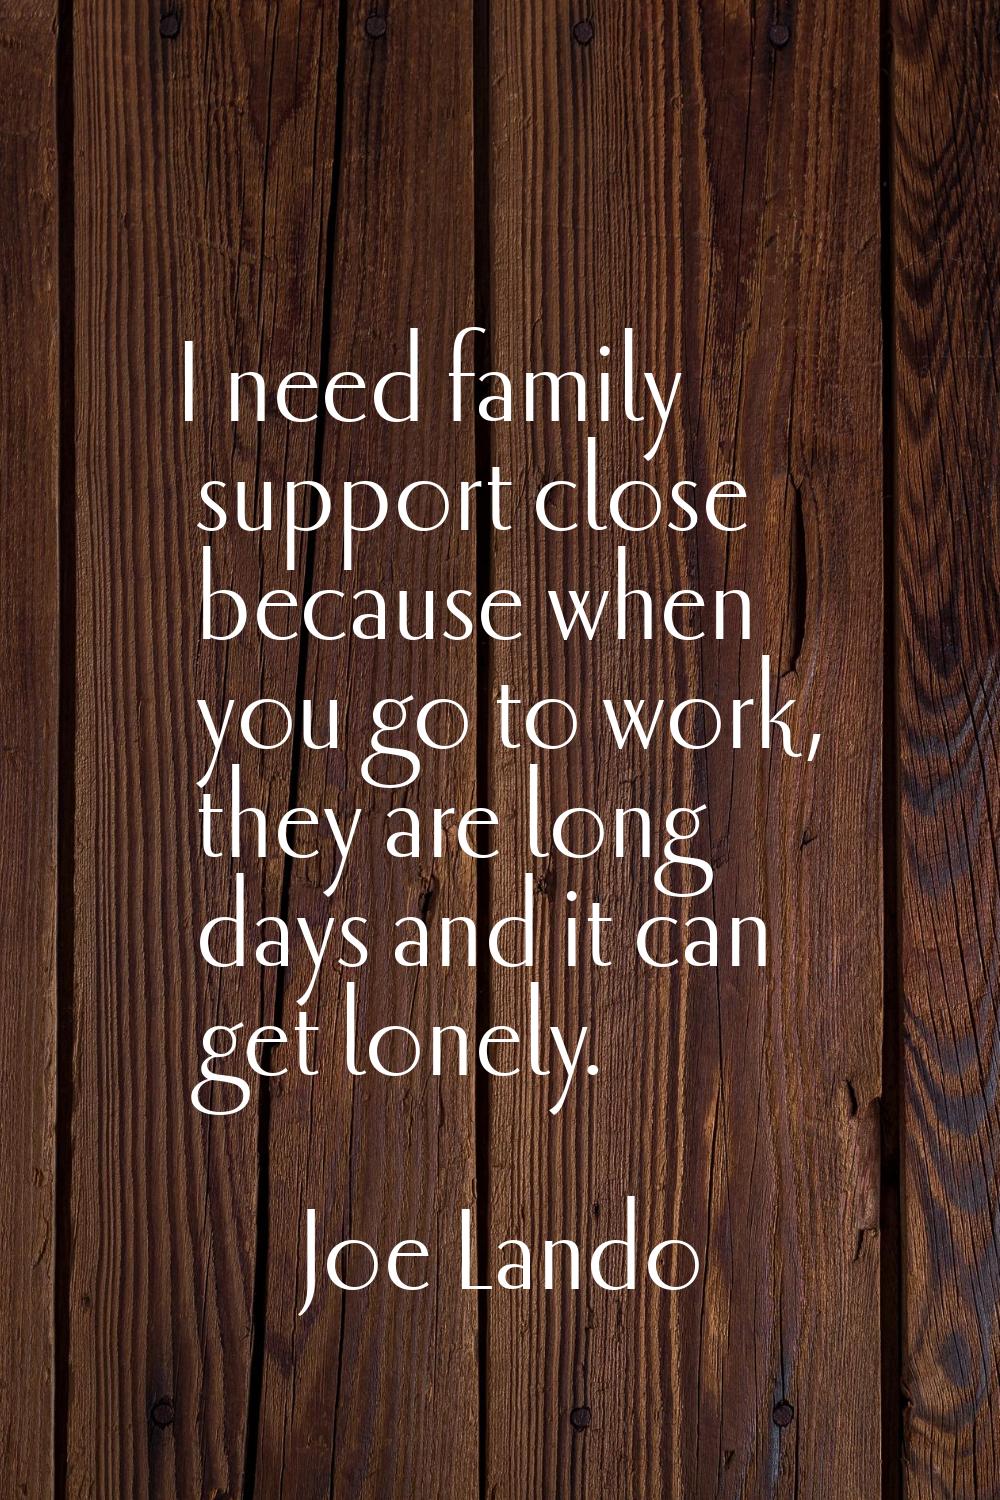 I need family support close because when you go to work, they are long days and it can get lonely.